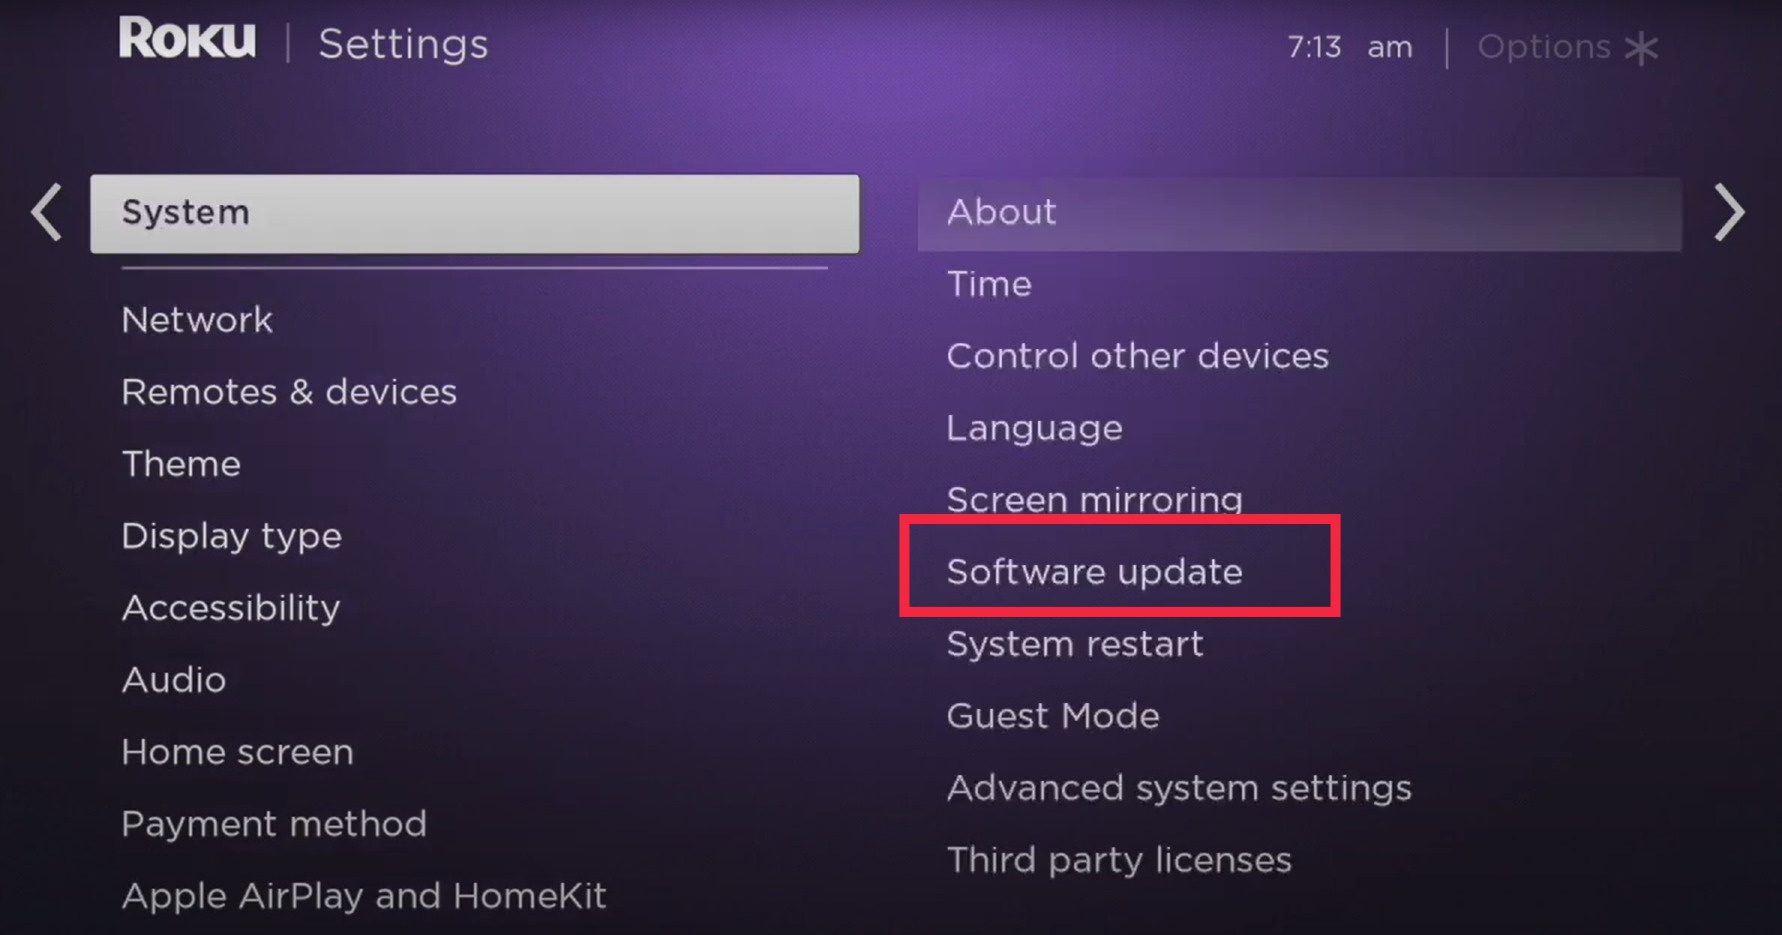 Updating the Roku Device to latest version